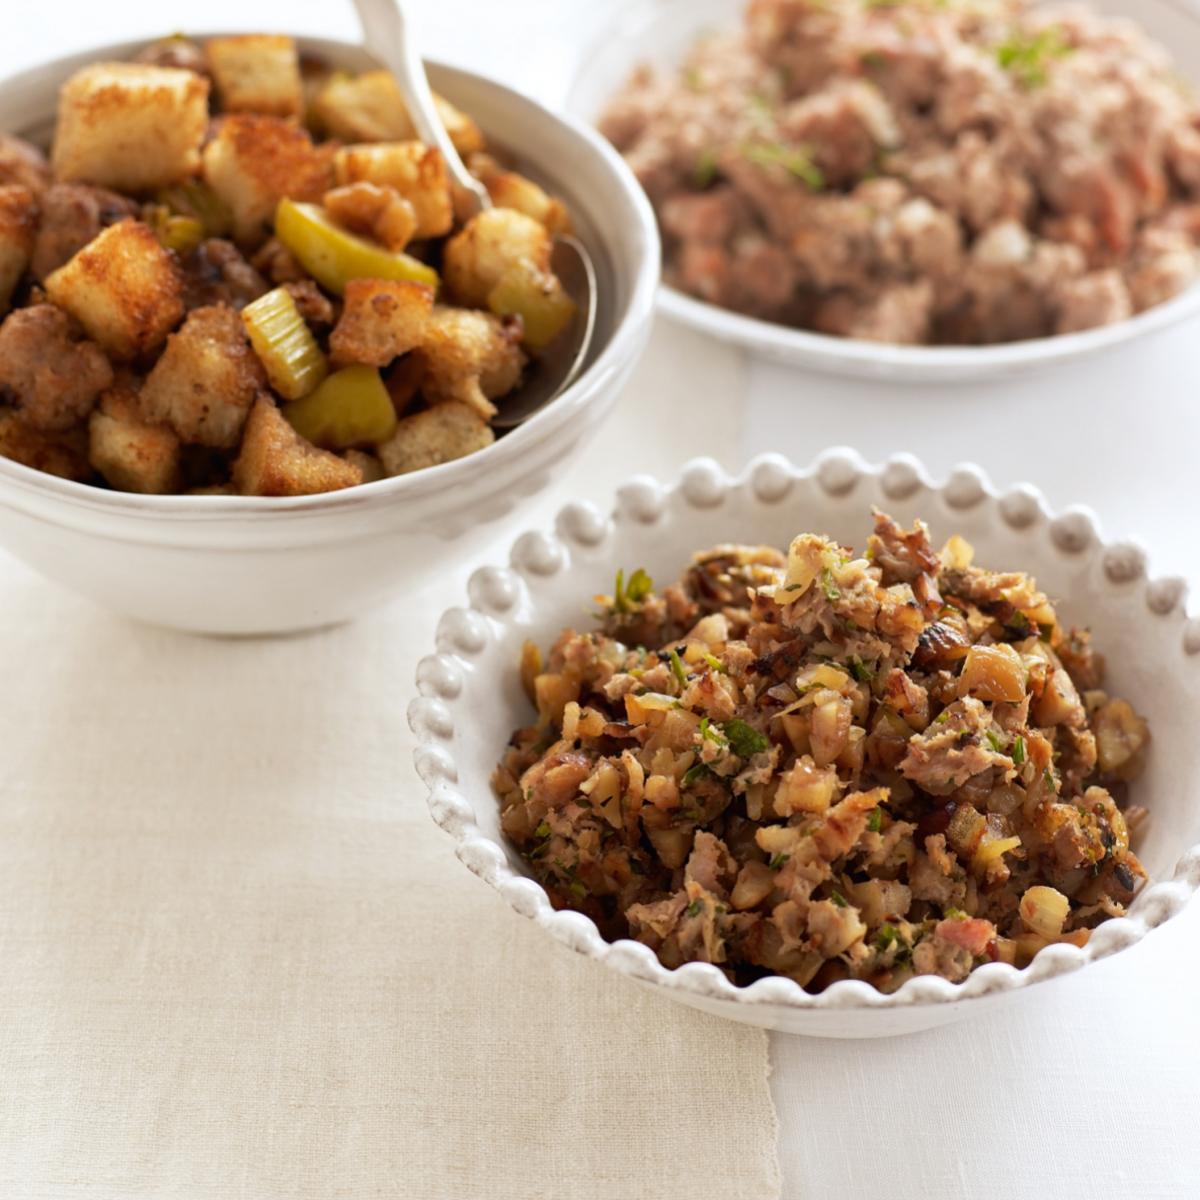 Is it OK to freeze stuffing?